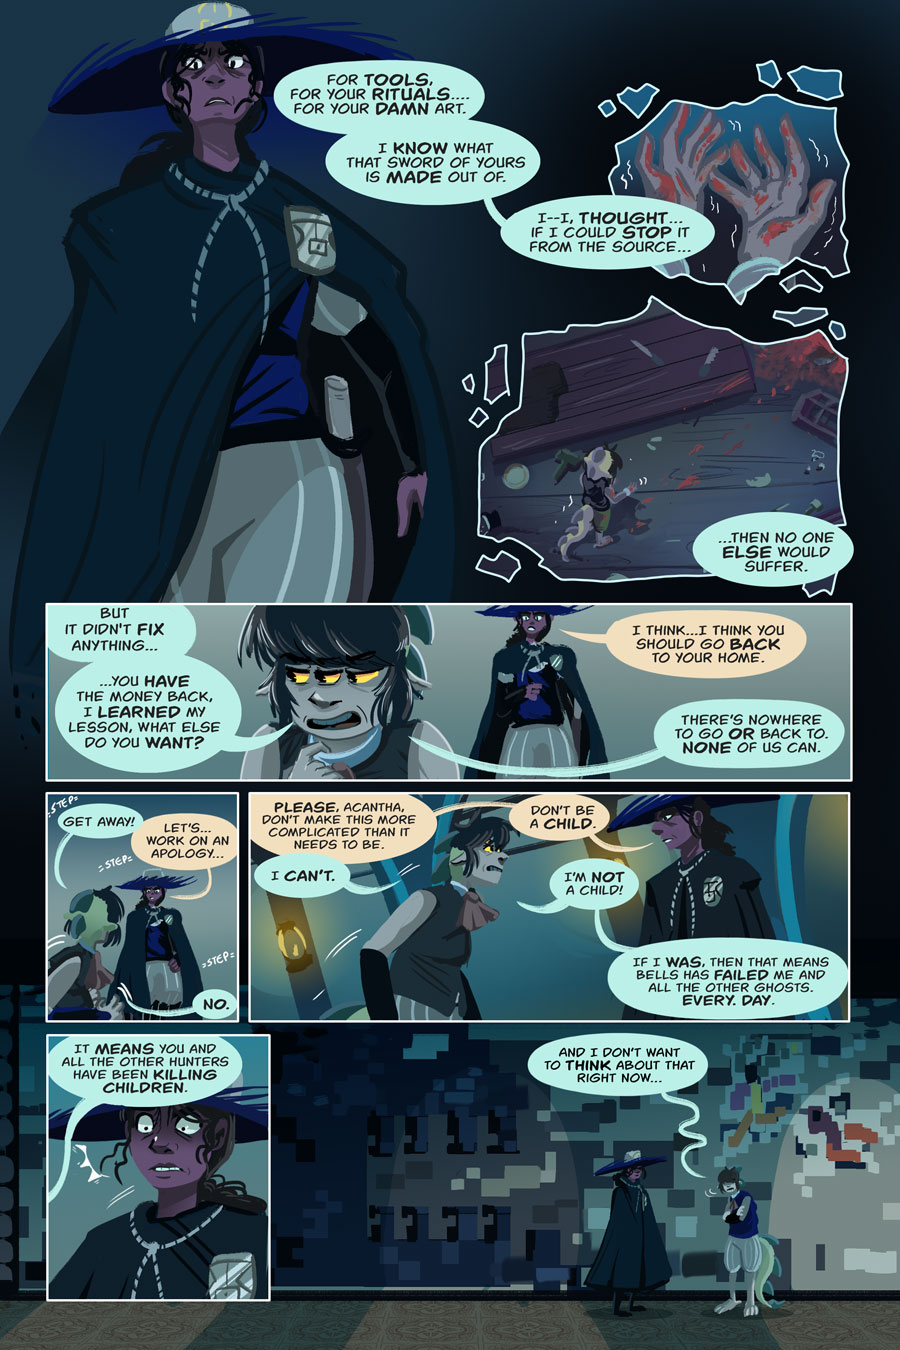 Chapter 8, page 41